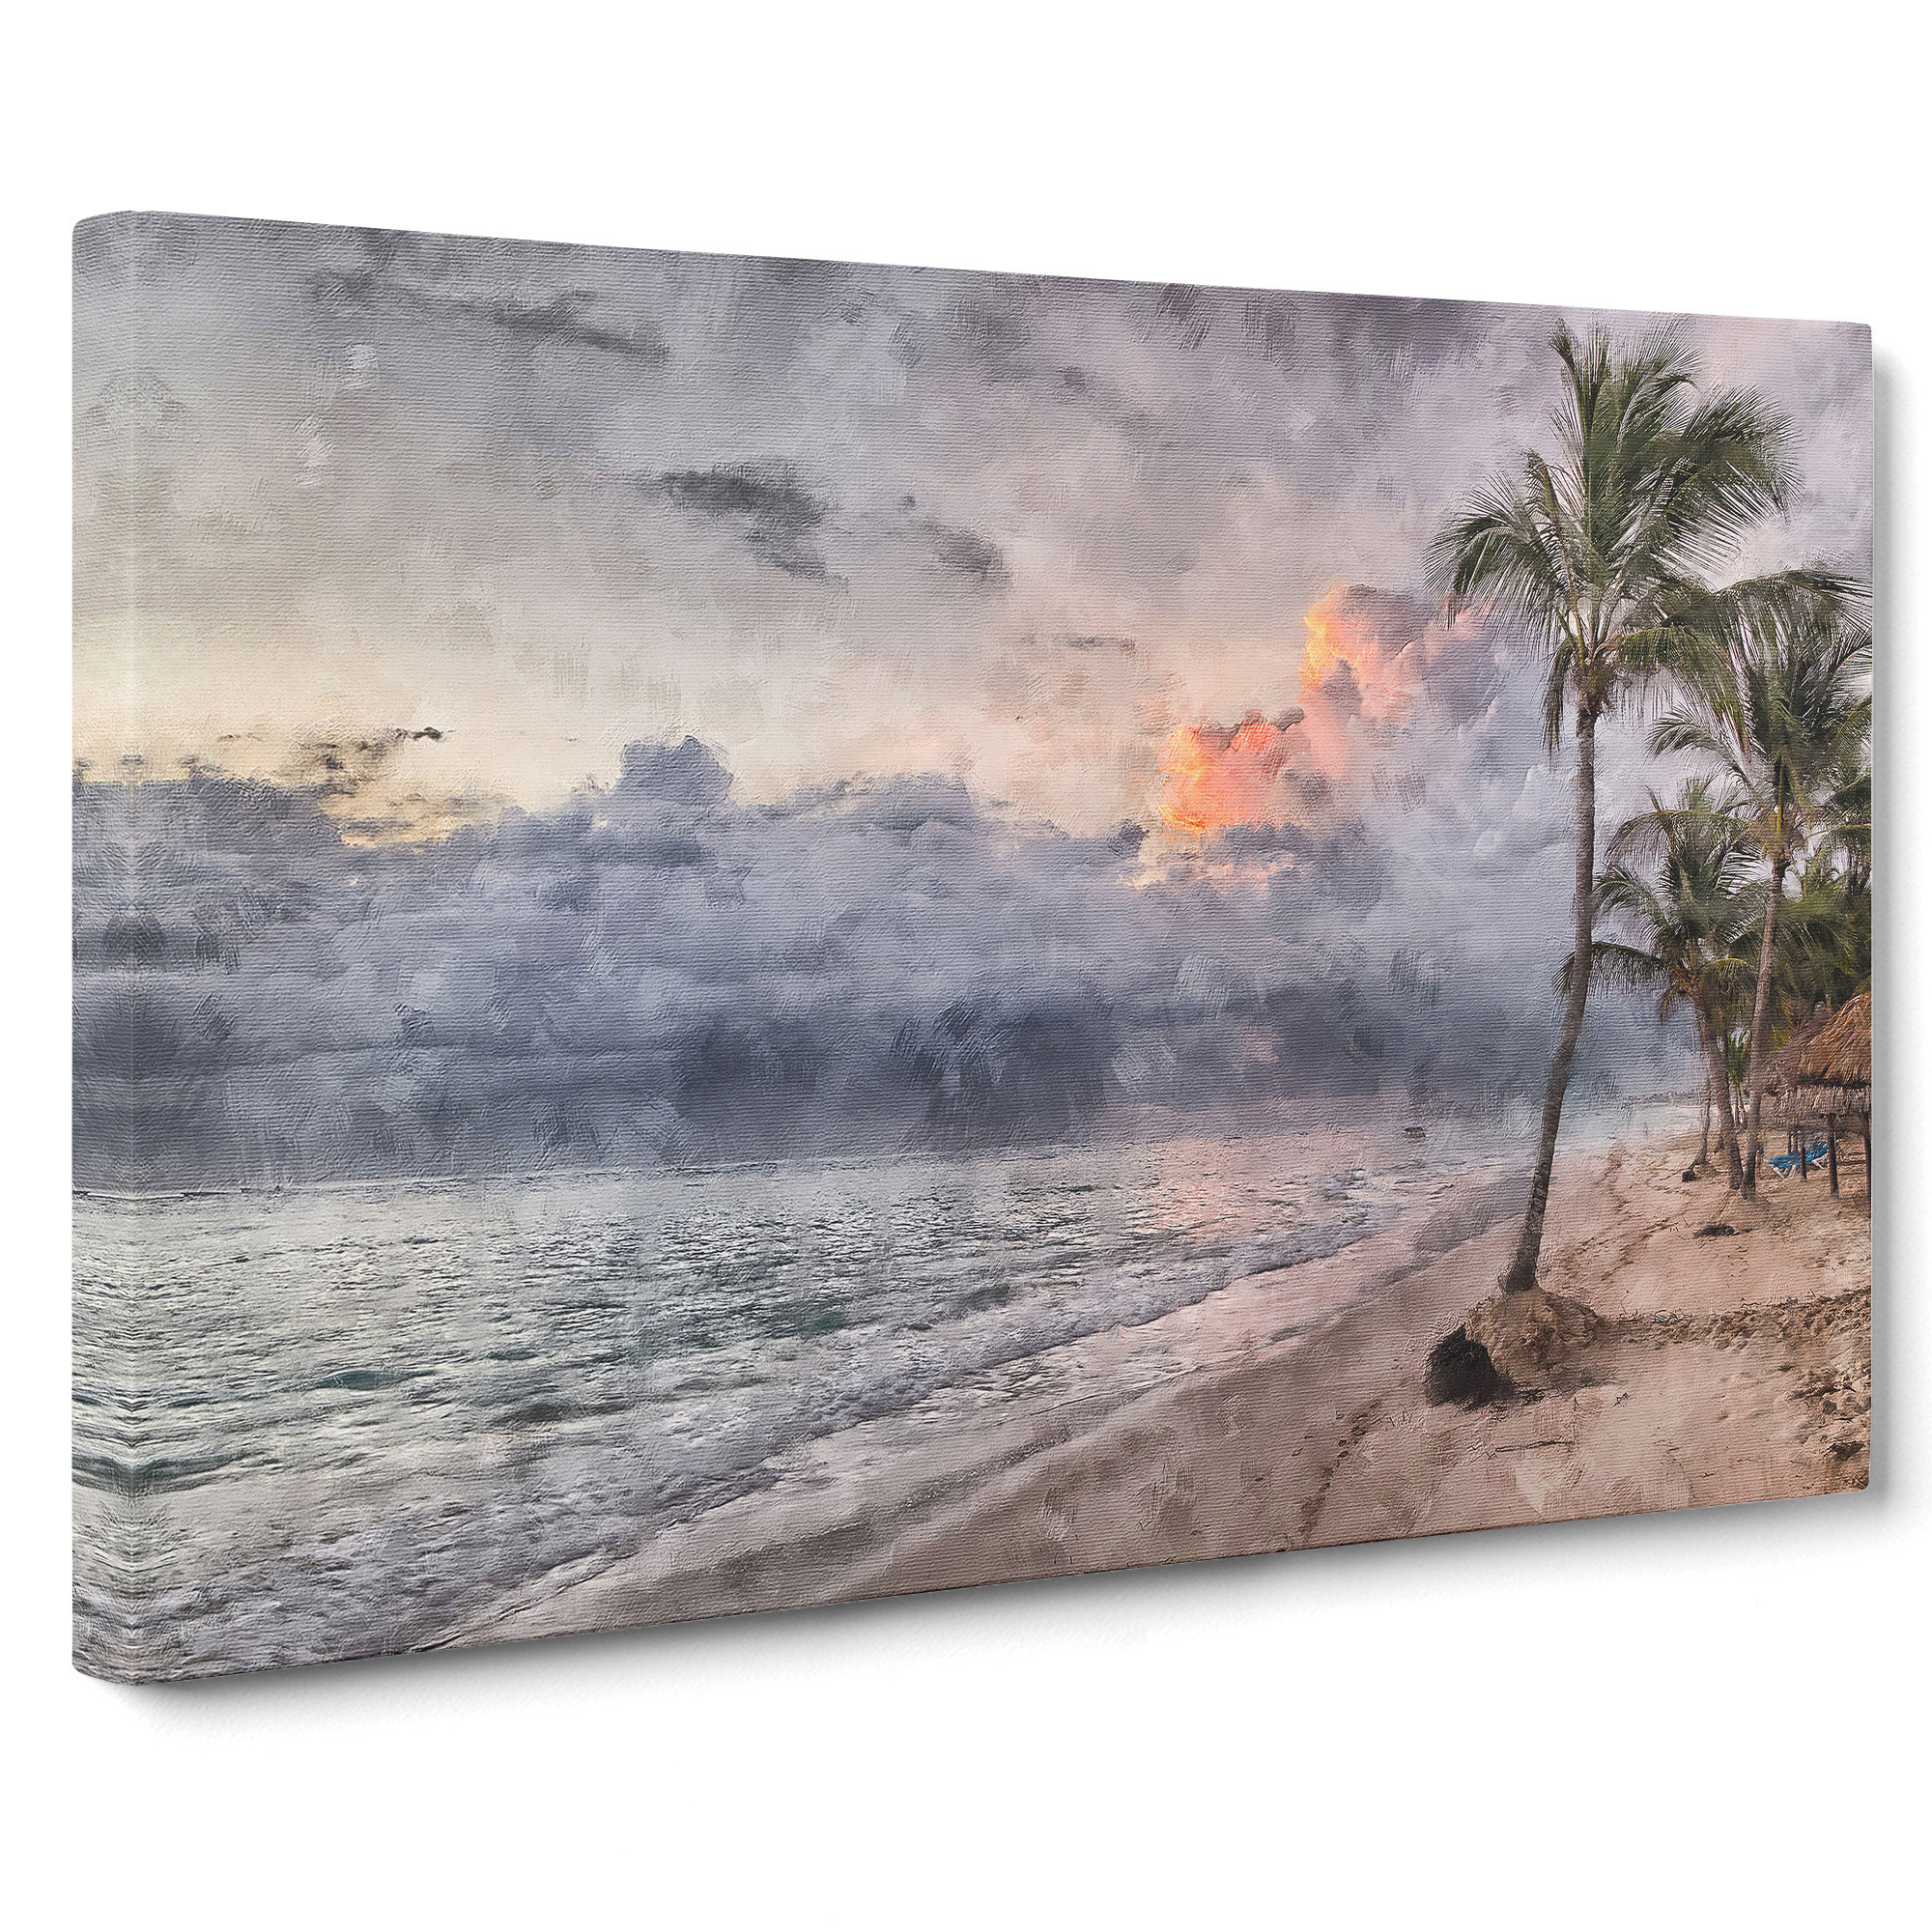 Dominican Republic Beach Painting Canvas Print Wall Art Picture | eBay